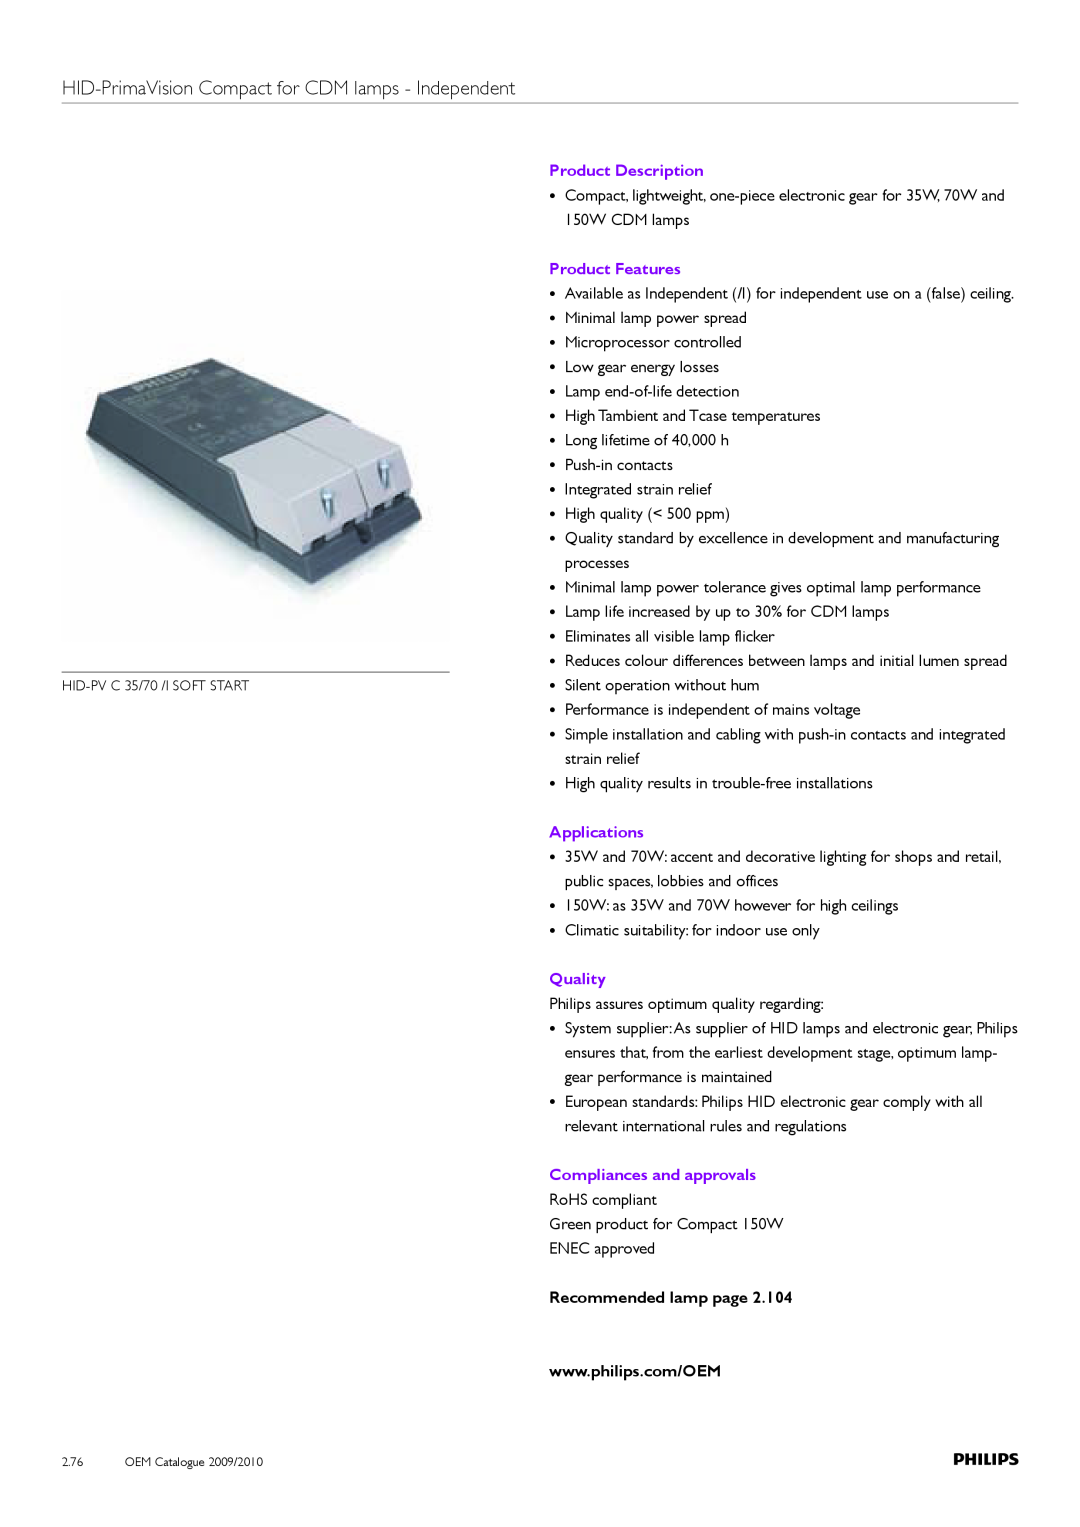 Philips Compact HID Lamp and Gear Product Description, Product Features, Applications, Quality, Compliances and approvals 